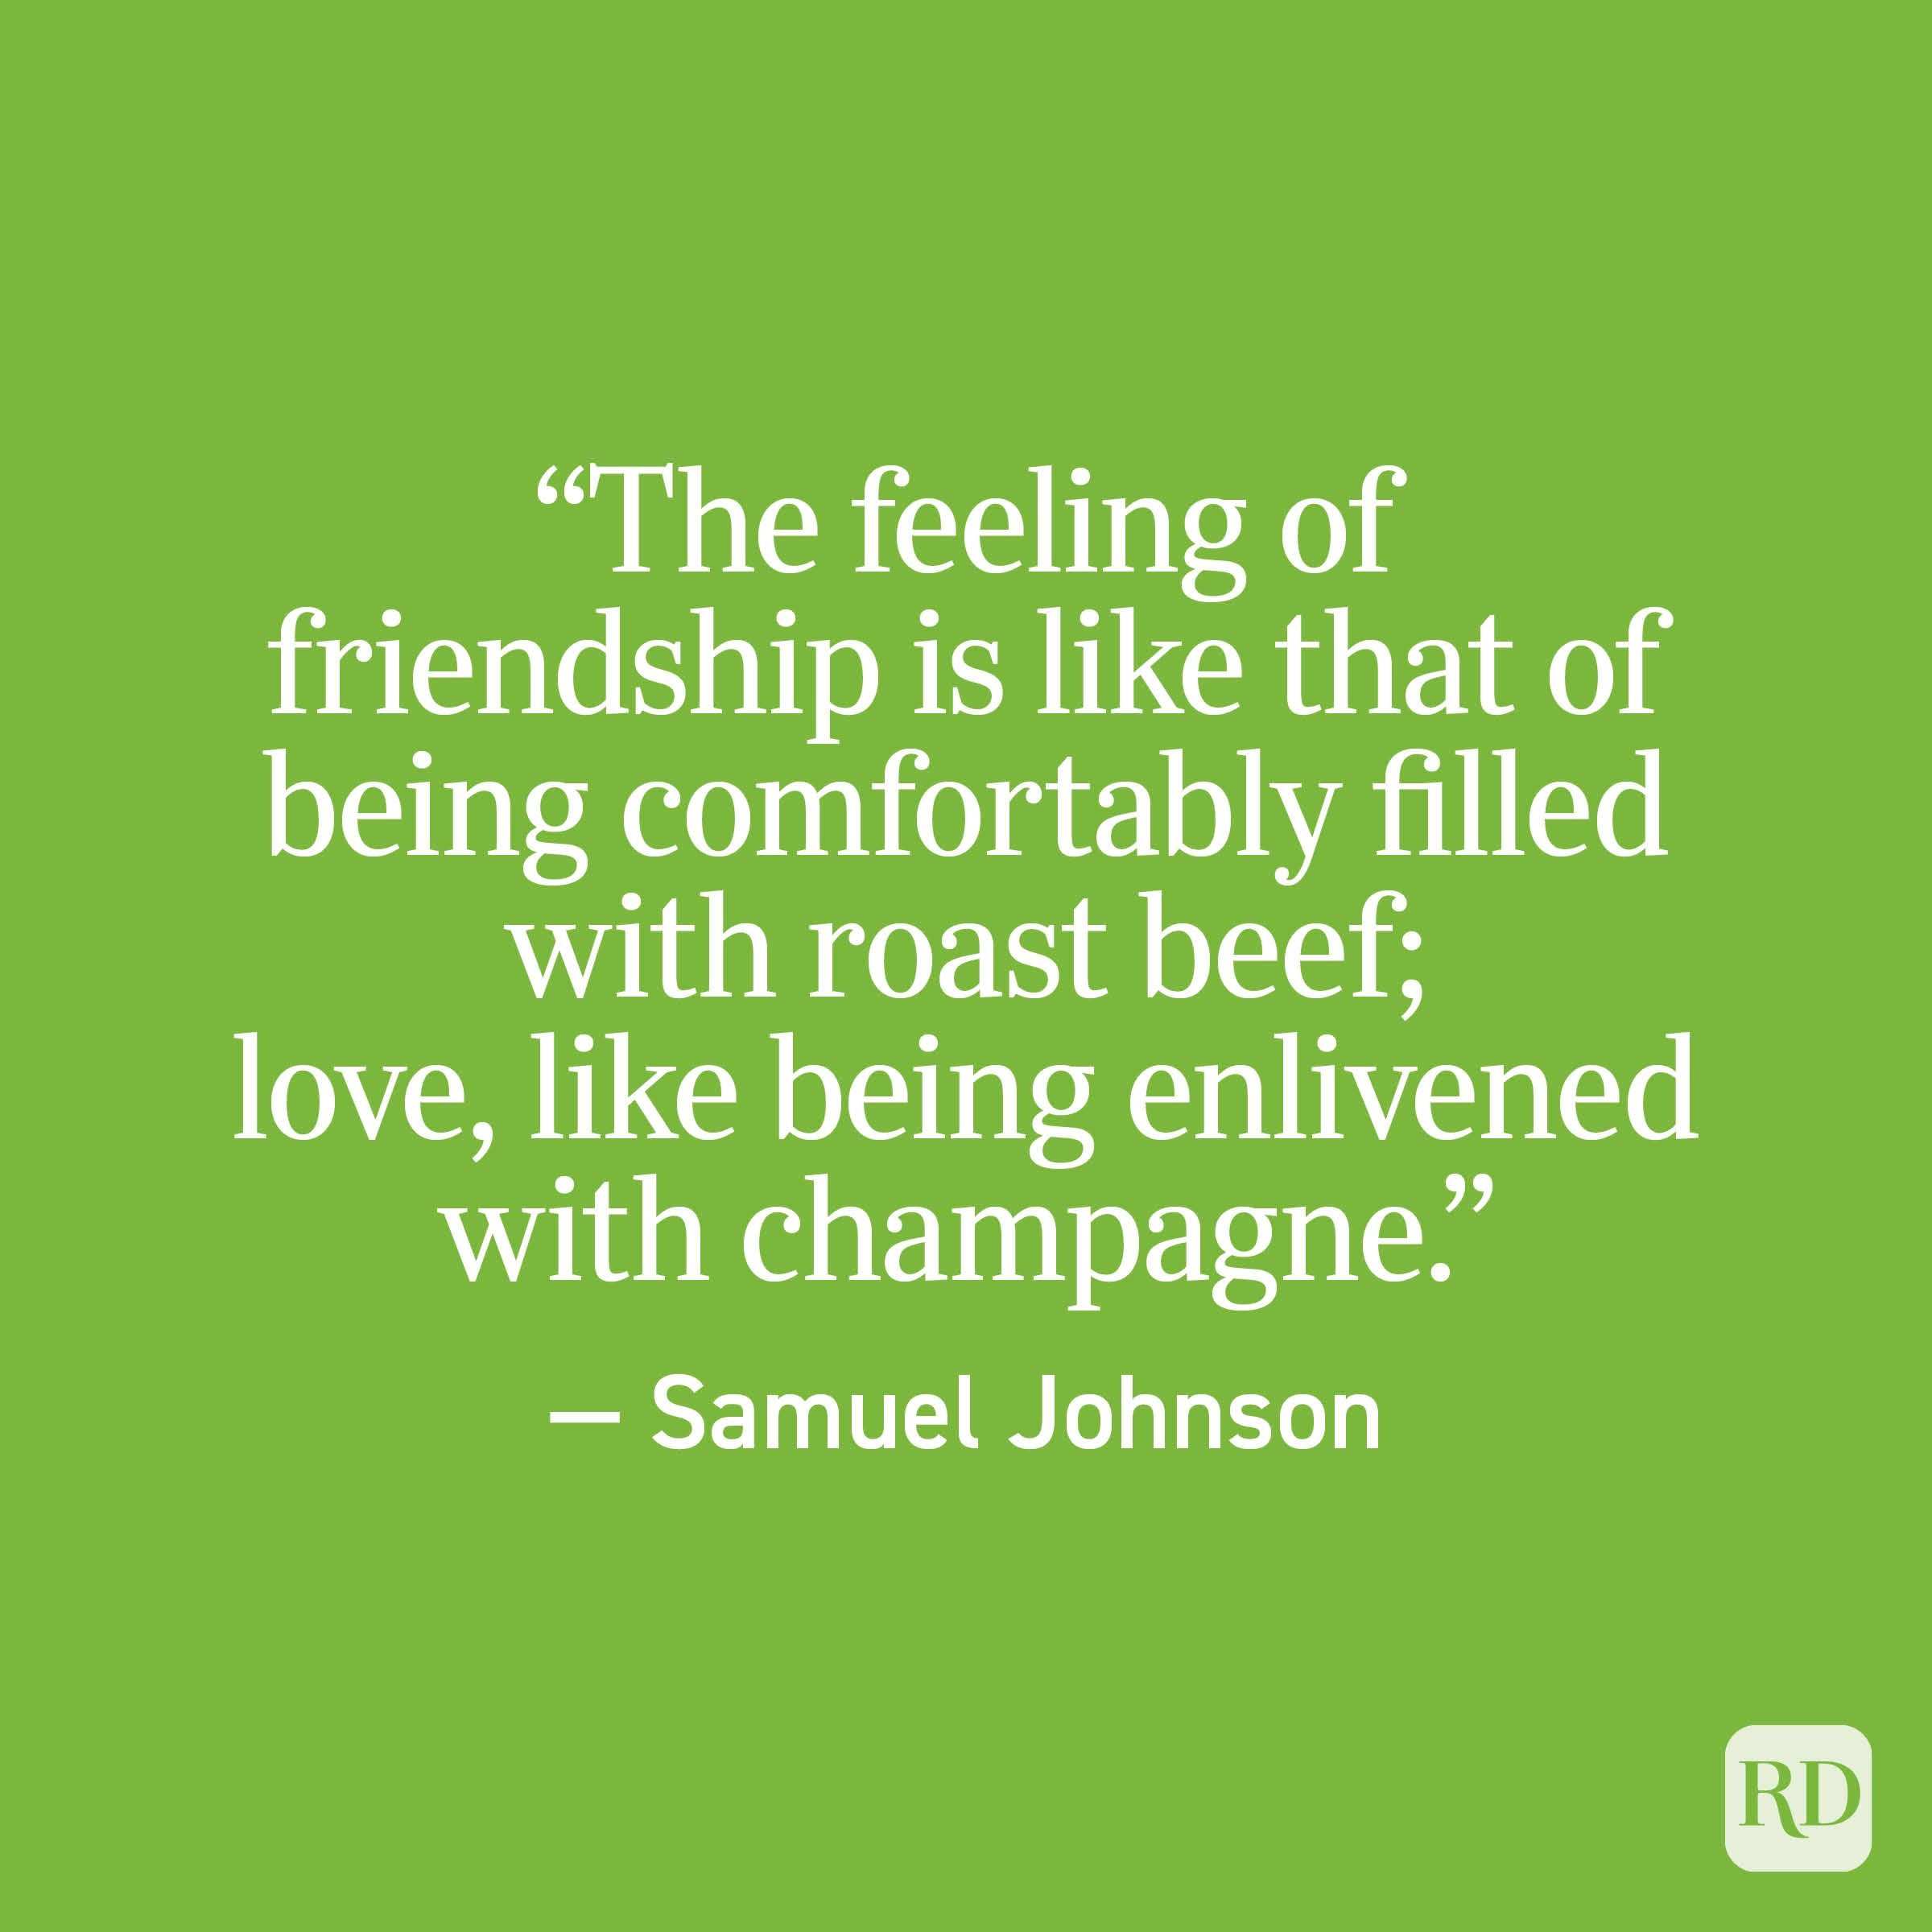 "The feeling of friendship is like that of being comfortably filled with roast beef; love, like being enlivened with champagne." - Samuel Johnson